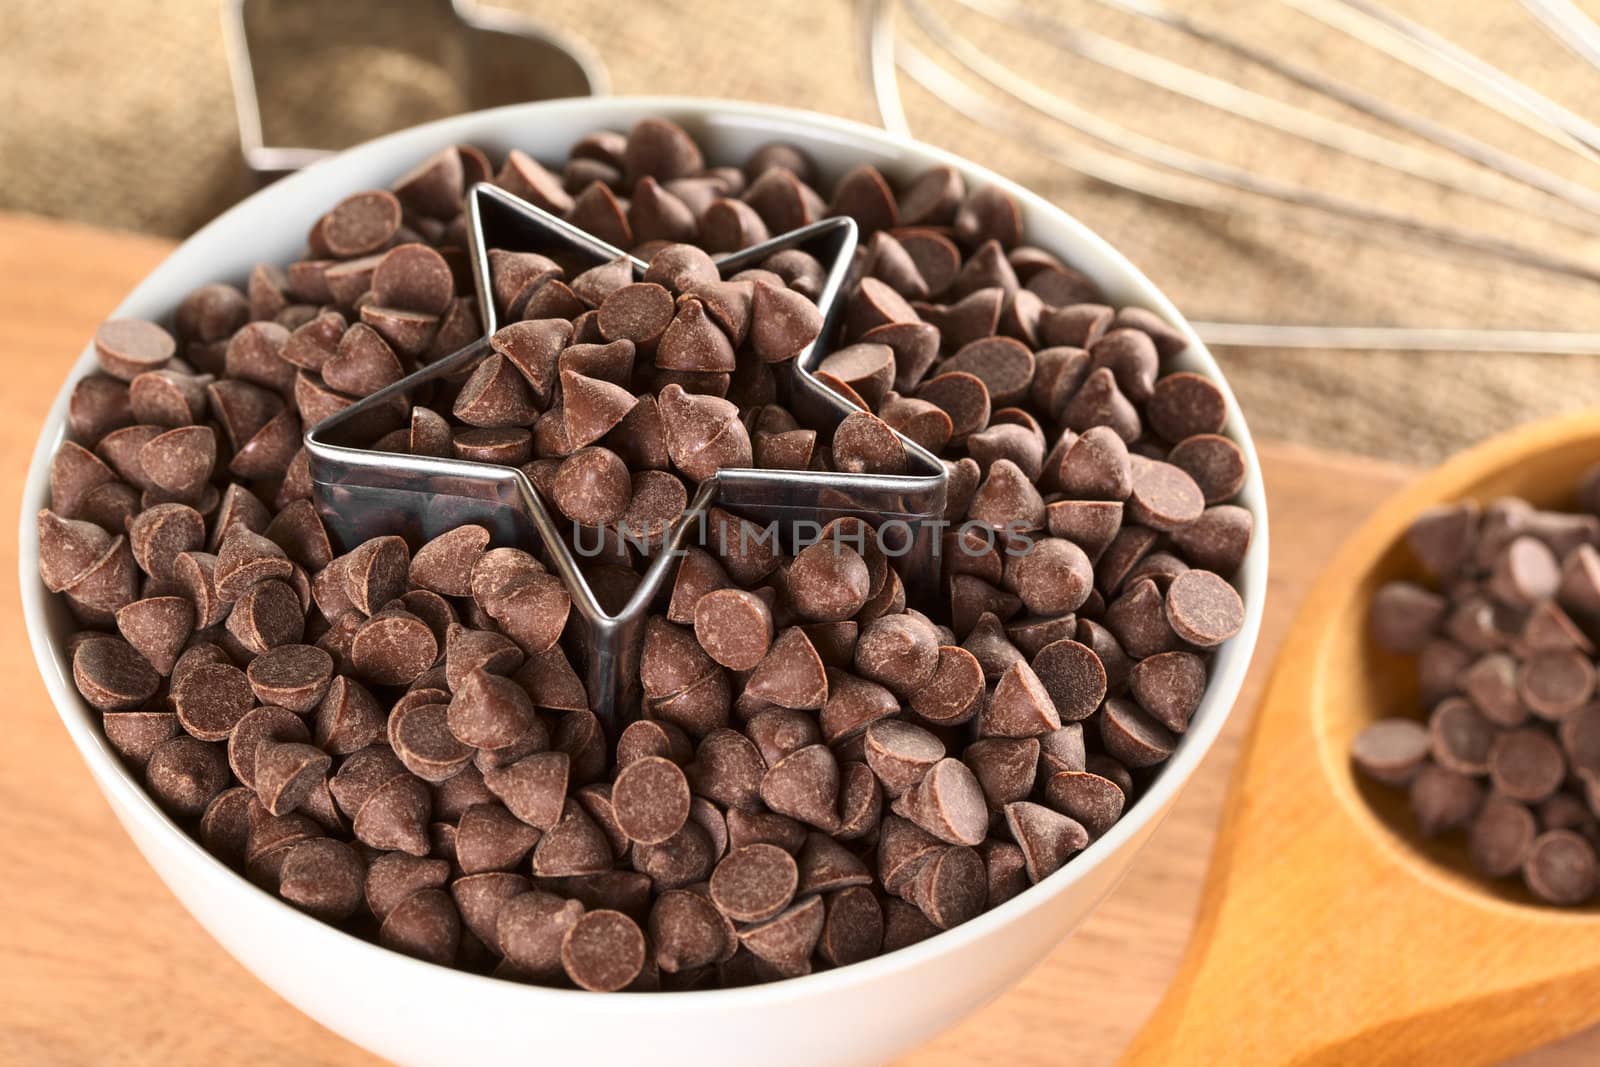 Star-shaped cookie cutter with chocolate chips in a bowl surrounded by baking utensils (Selective Focus, Focus on the front of the cutter and the chocolate chips around)